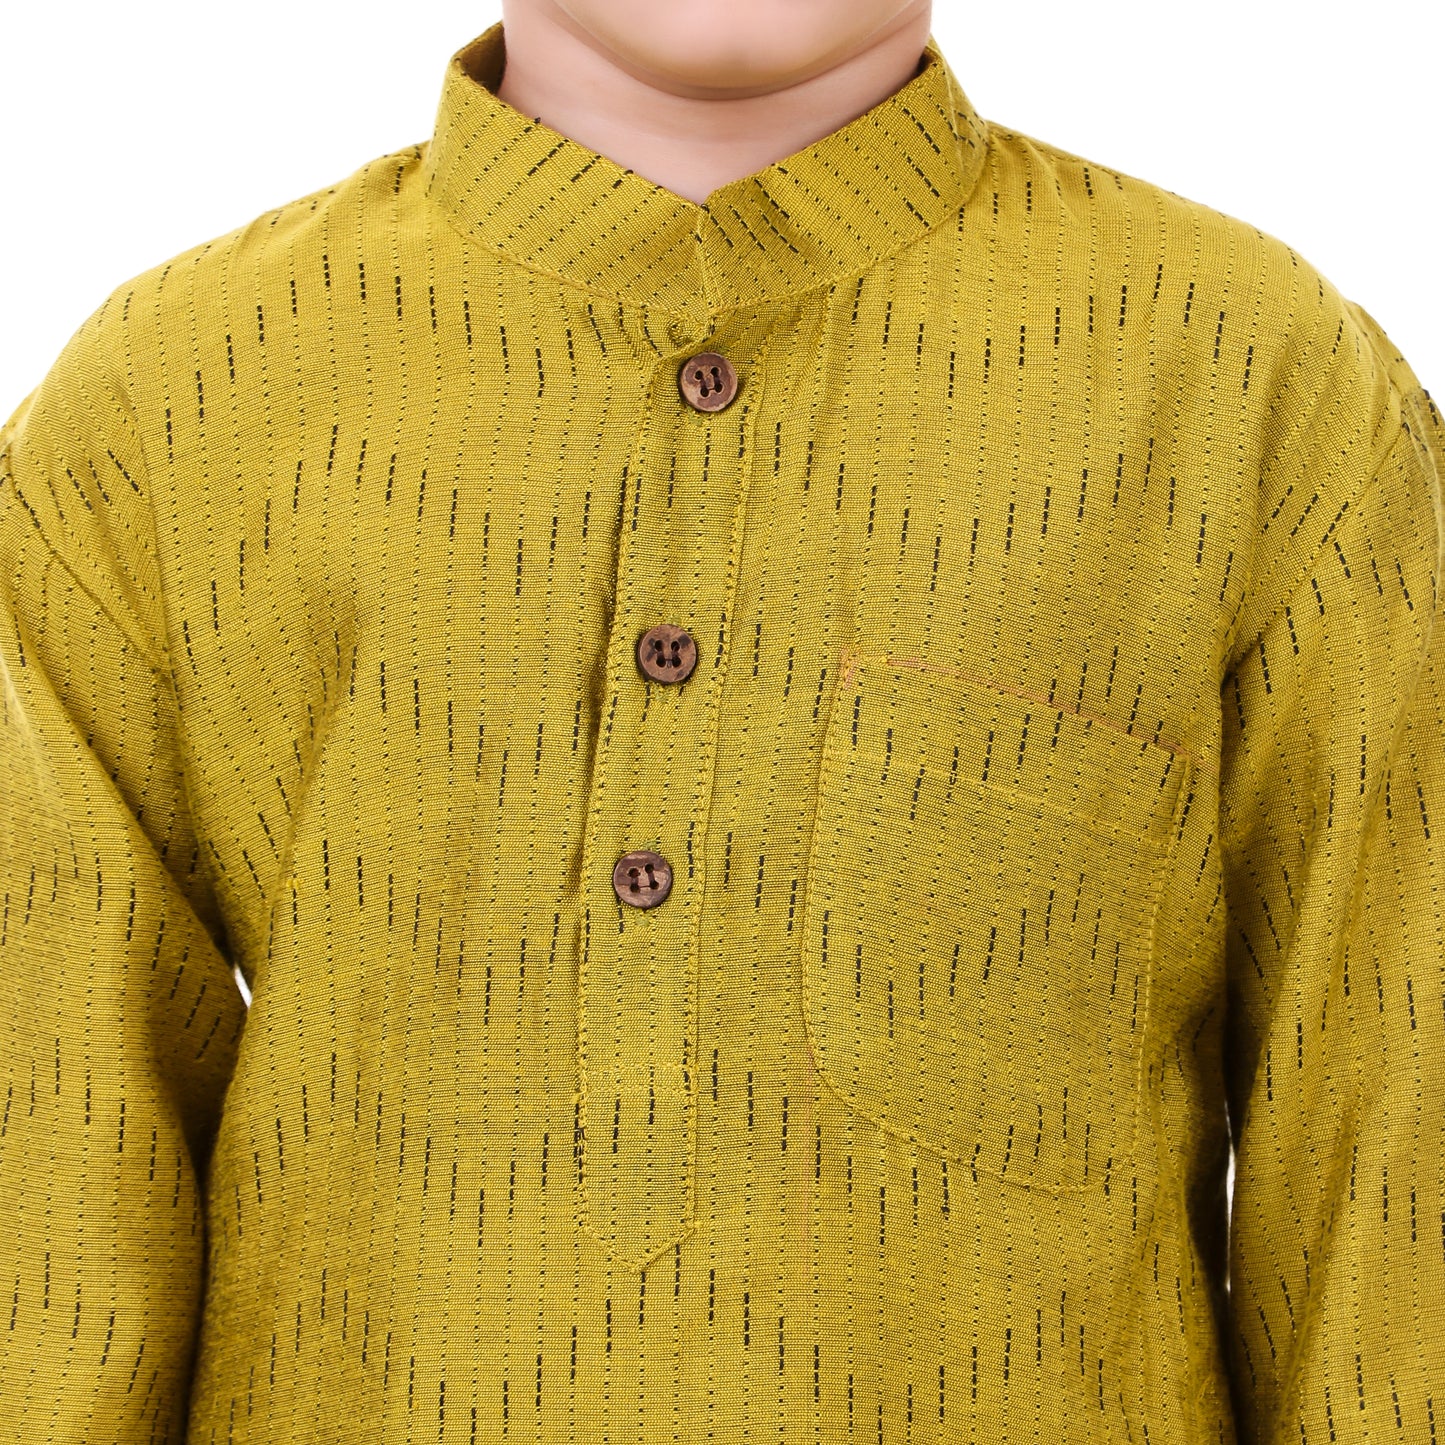 Lime Green Kurta Pajama for Boys, Ages 0-16 Years, Cotton-Silk (with cotton lining)